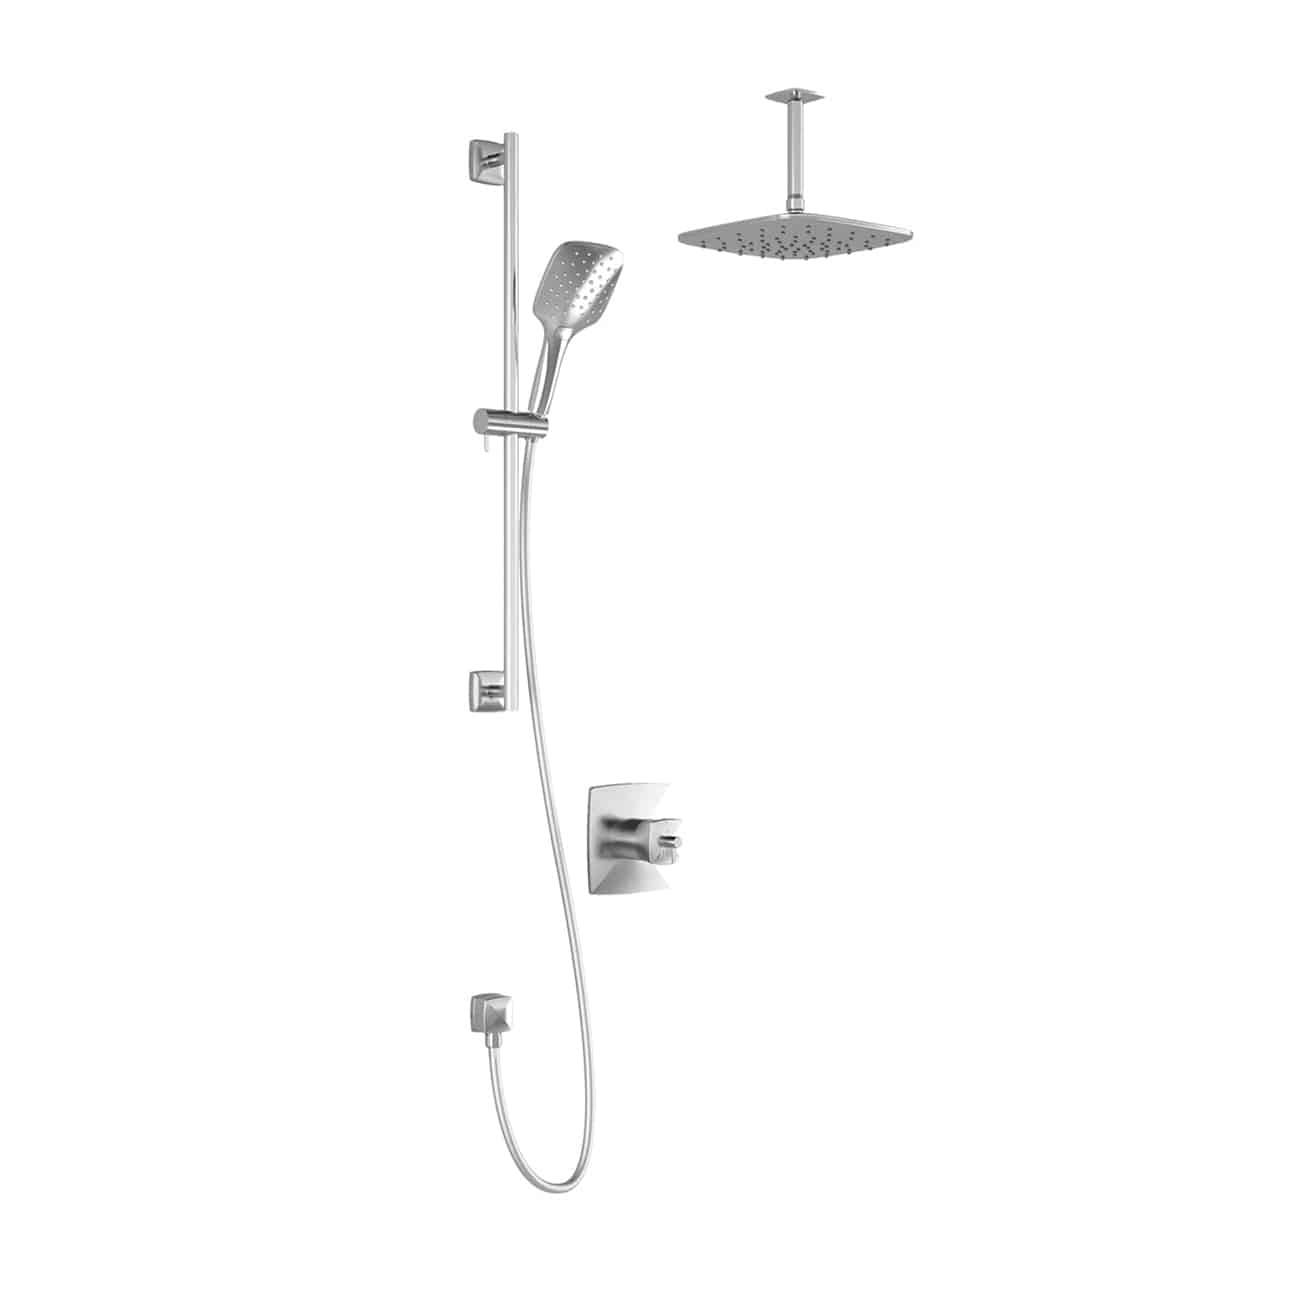 Kalia UMANI TCD1 PLUS (Valve Not Included) AQUATONIK T/P Coaxial Shower System with Vertical Ceiling Arm- Chrome